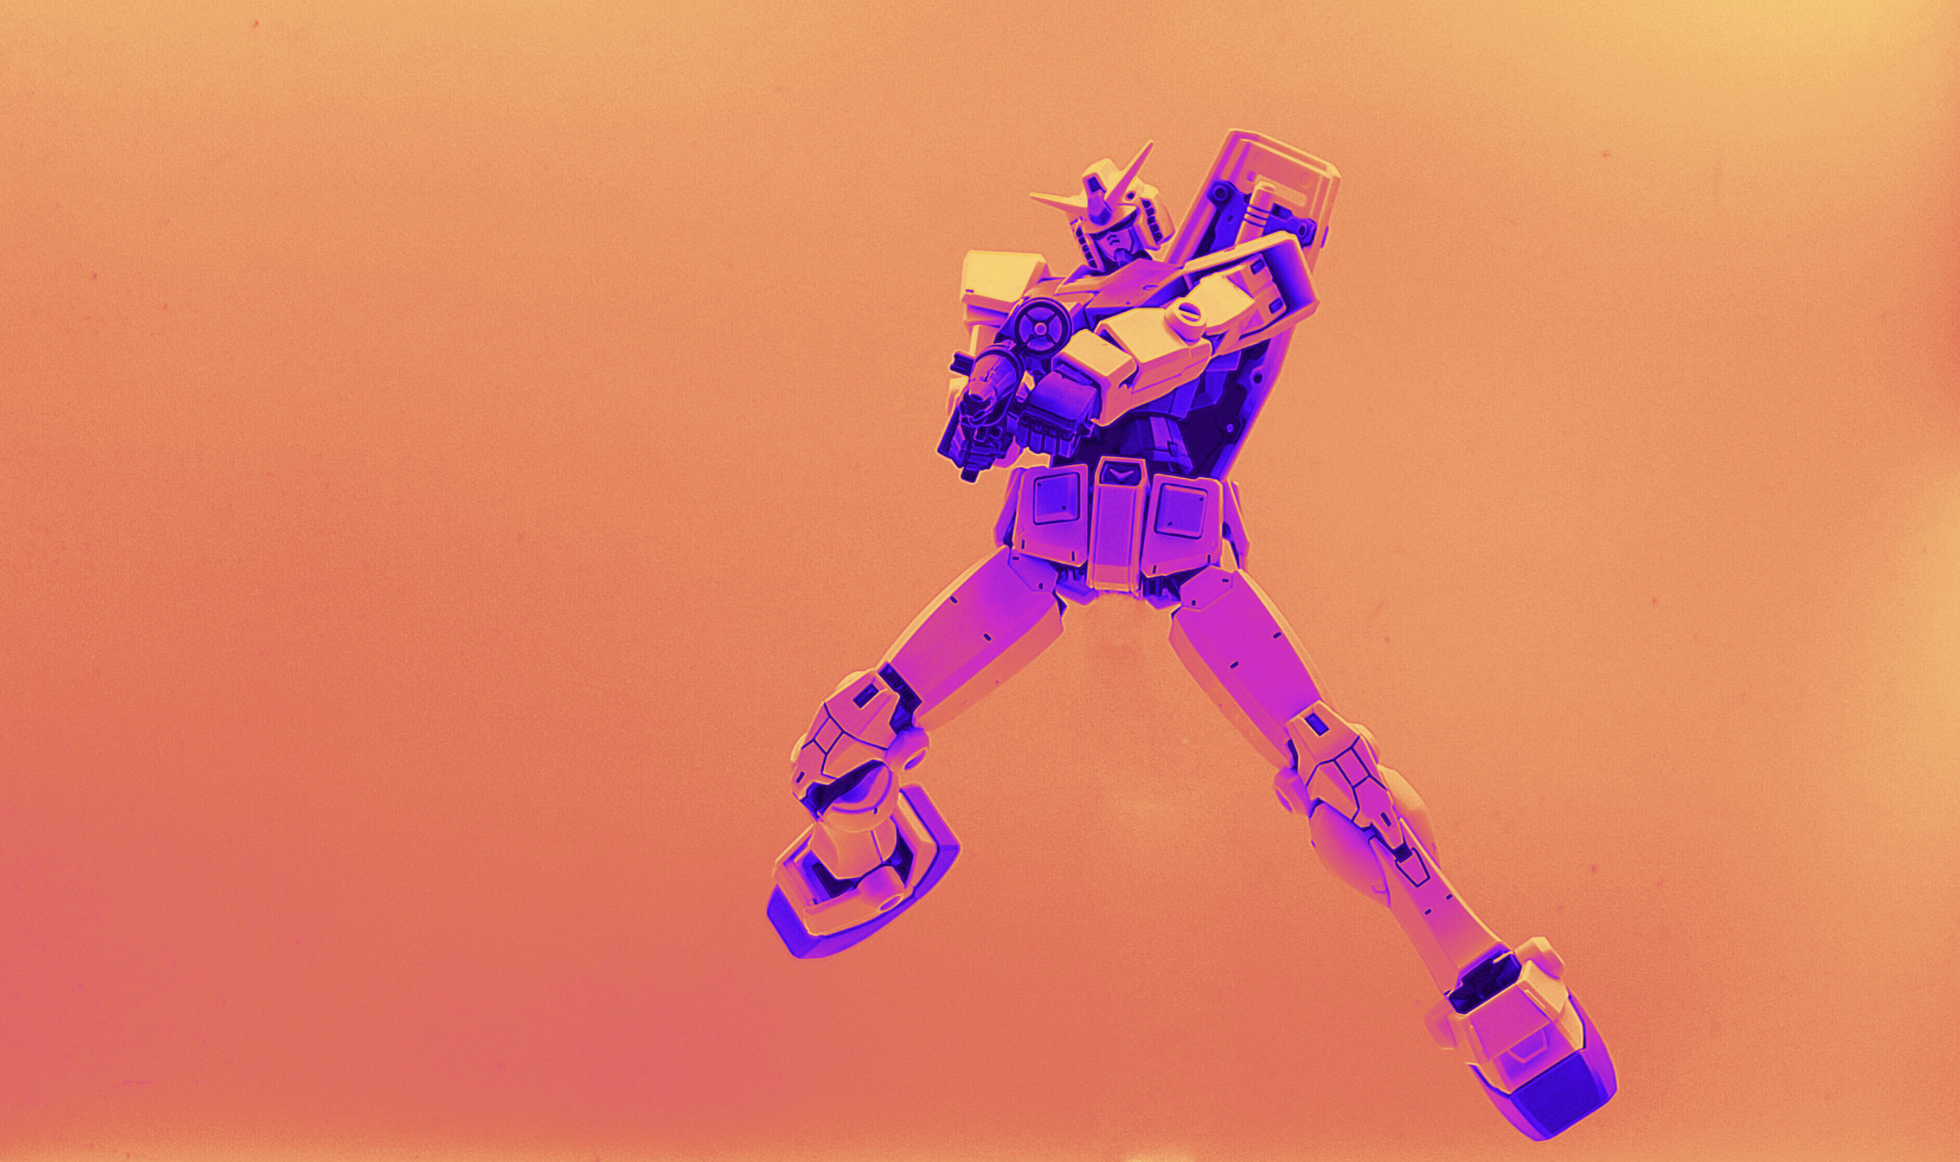 Neon orange, pink, and purple transformer model toy jumping mid-air and shooting at the camera in an action shot. Stylized image, comic-book like. Cover image for Comet ML's article "Explainable AI: Visualizing Attention in Transformers"